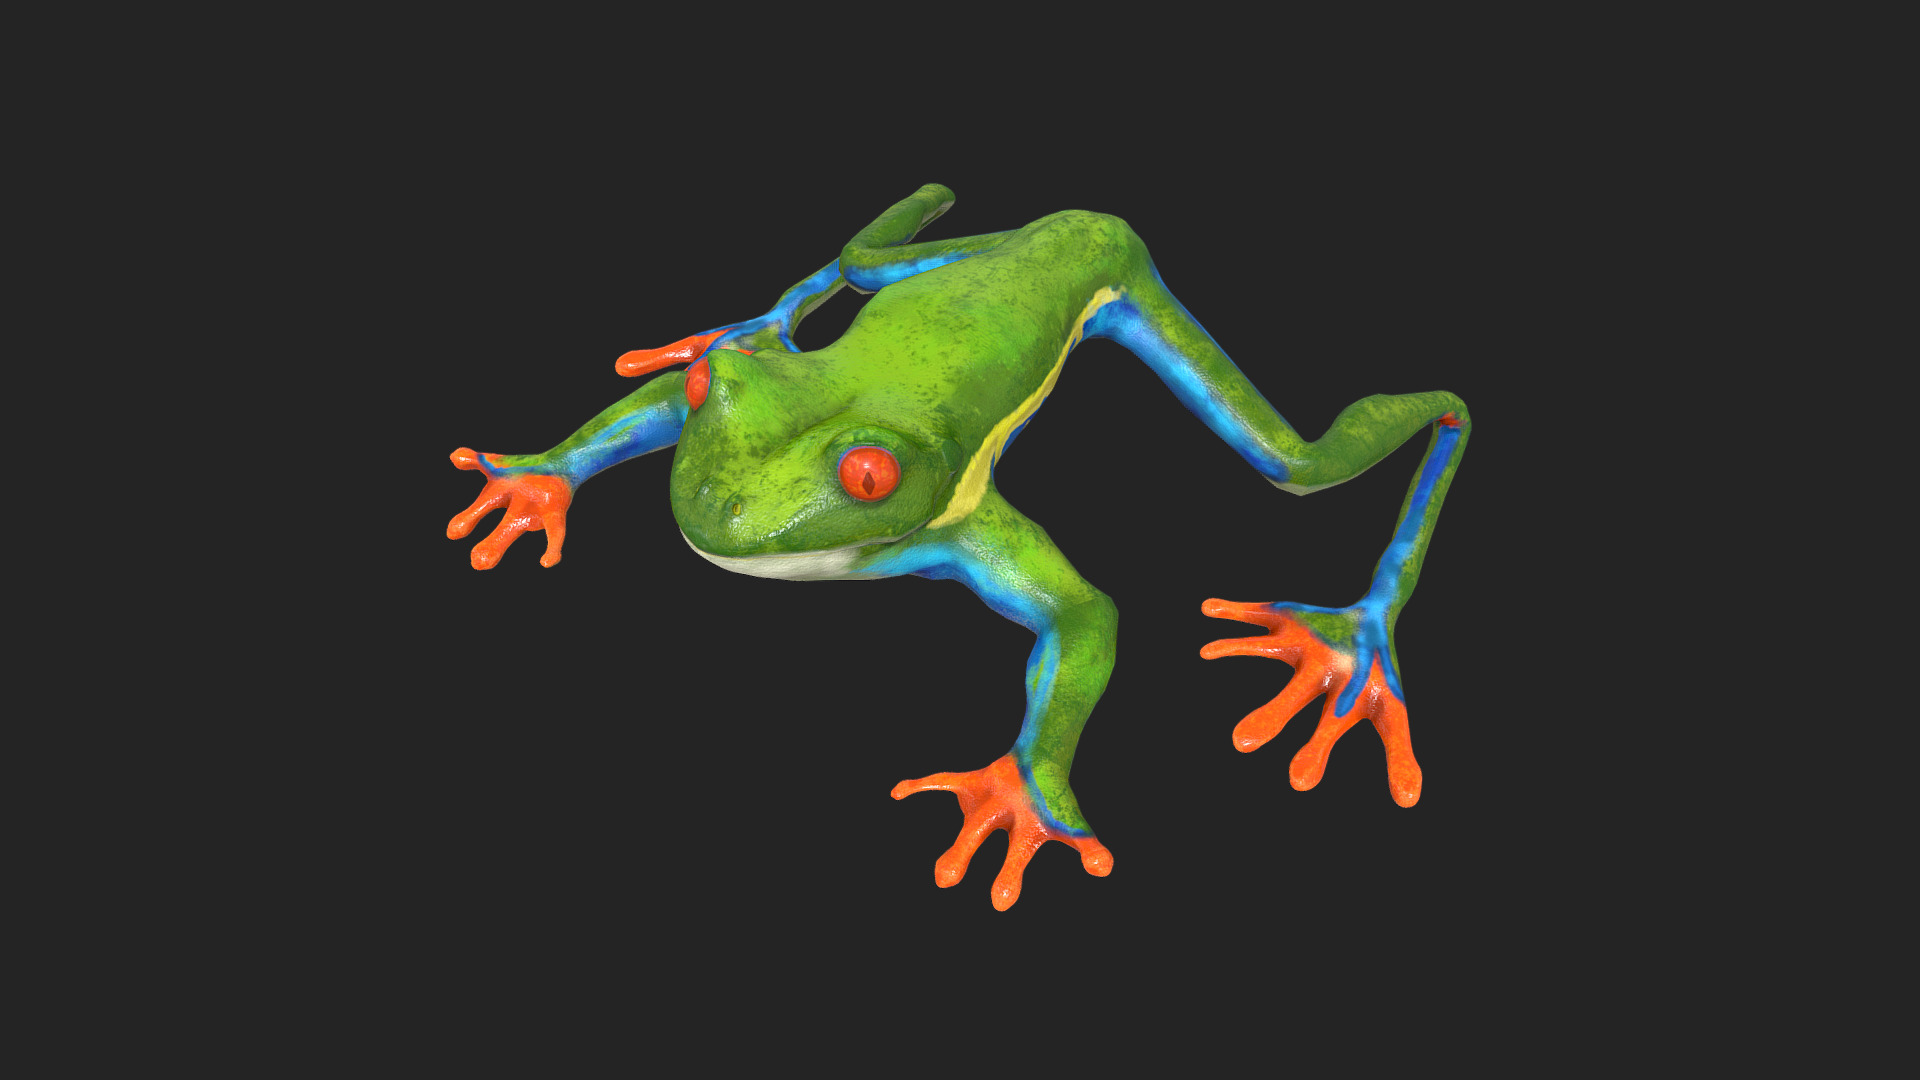 3D model Low poly tree frog Hylidae amphibian - This is a 3D model of the Low poly tree frog Hylidae amphibian. The 3D model is about a green frog with red eyes.